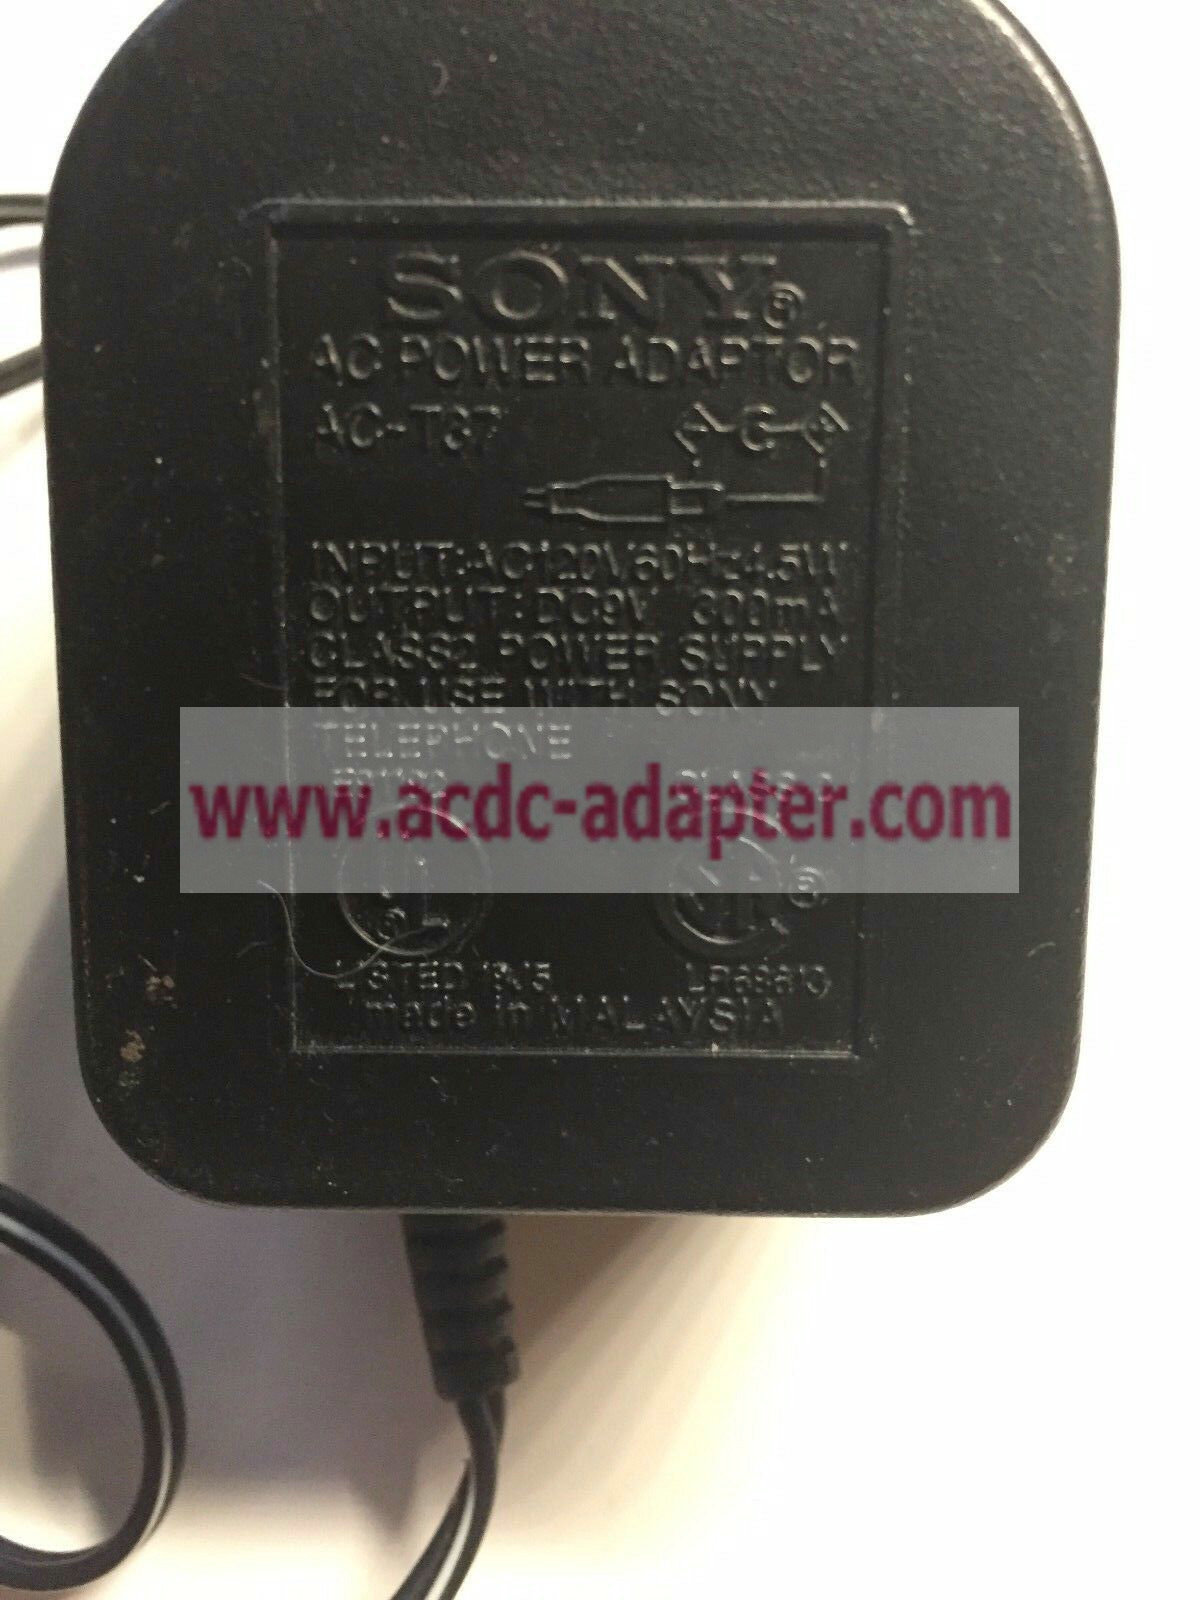 New Sony AC-T37 9V DC 300mA AC Adapter for Sony Telephone